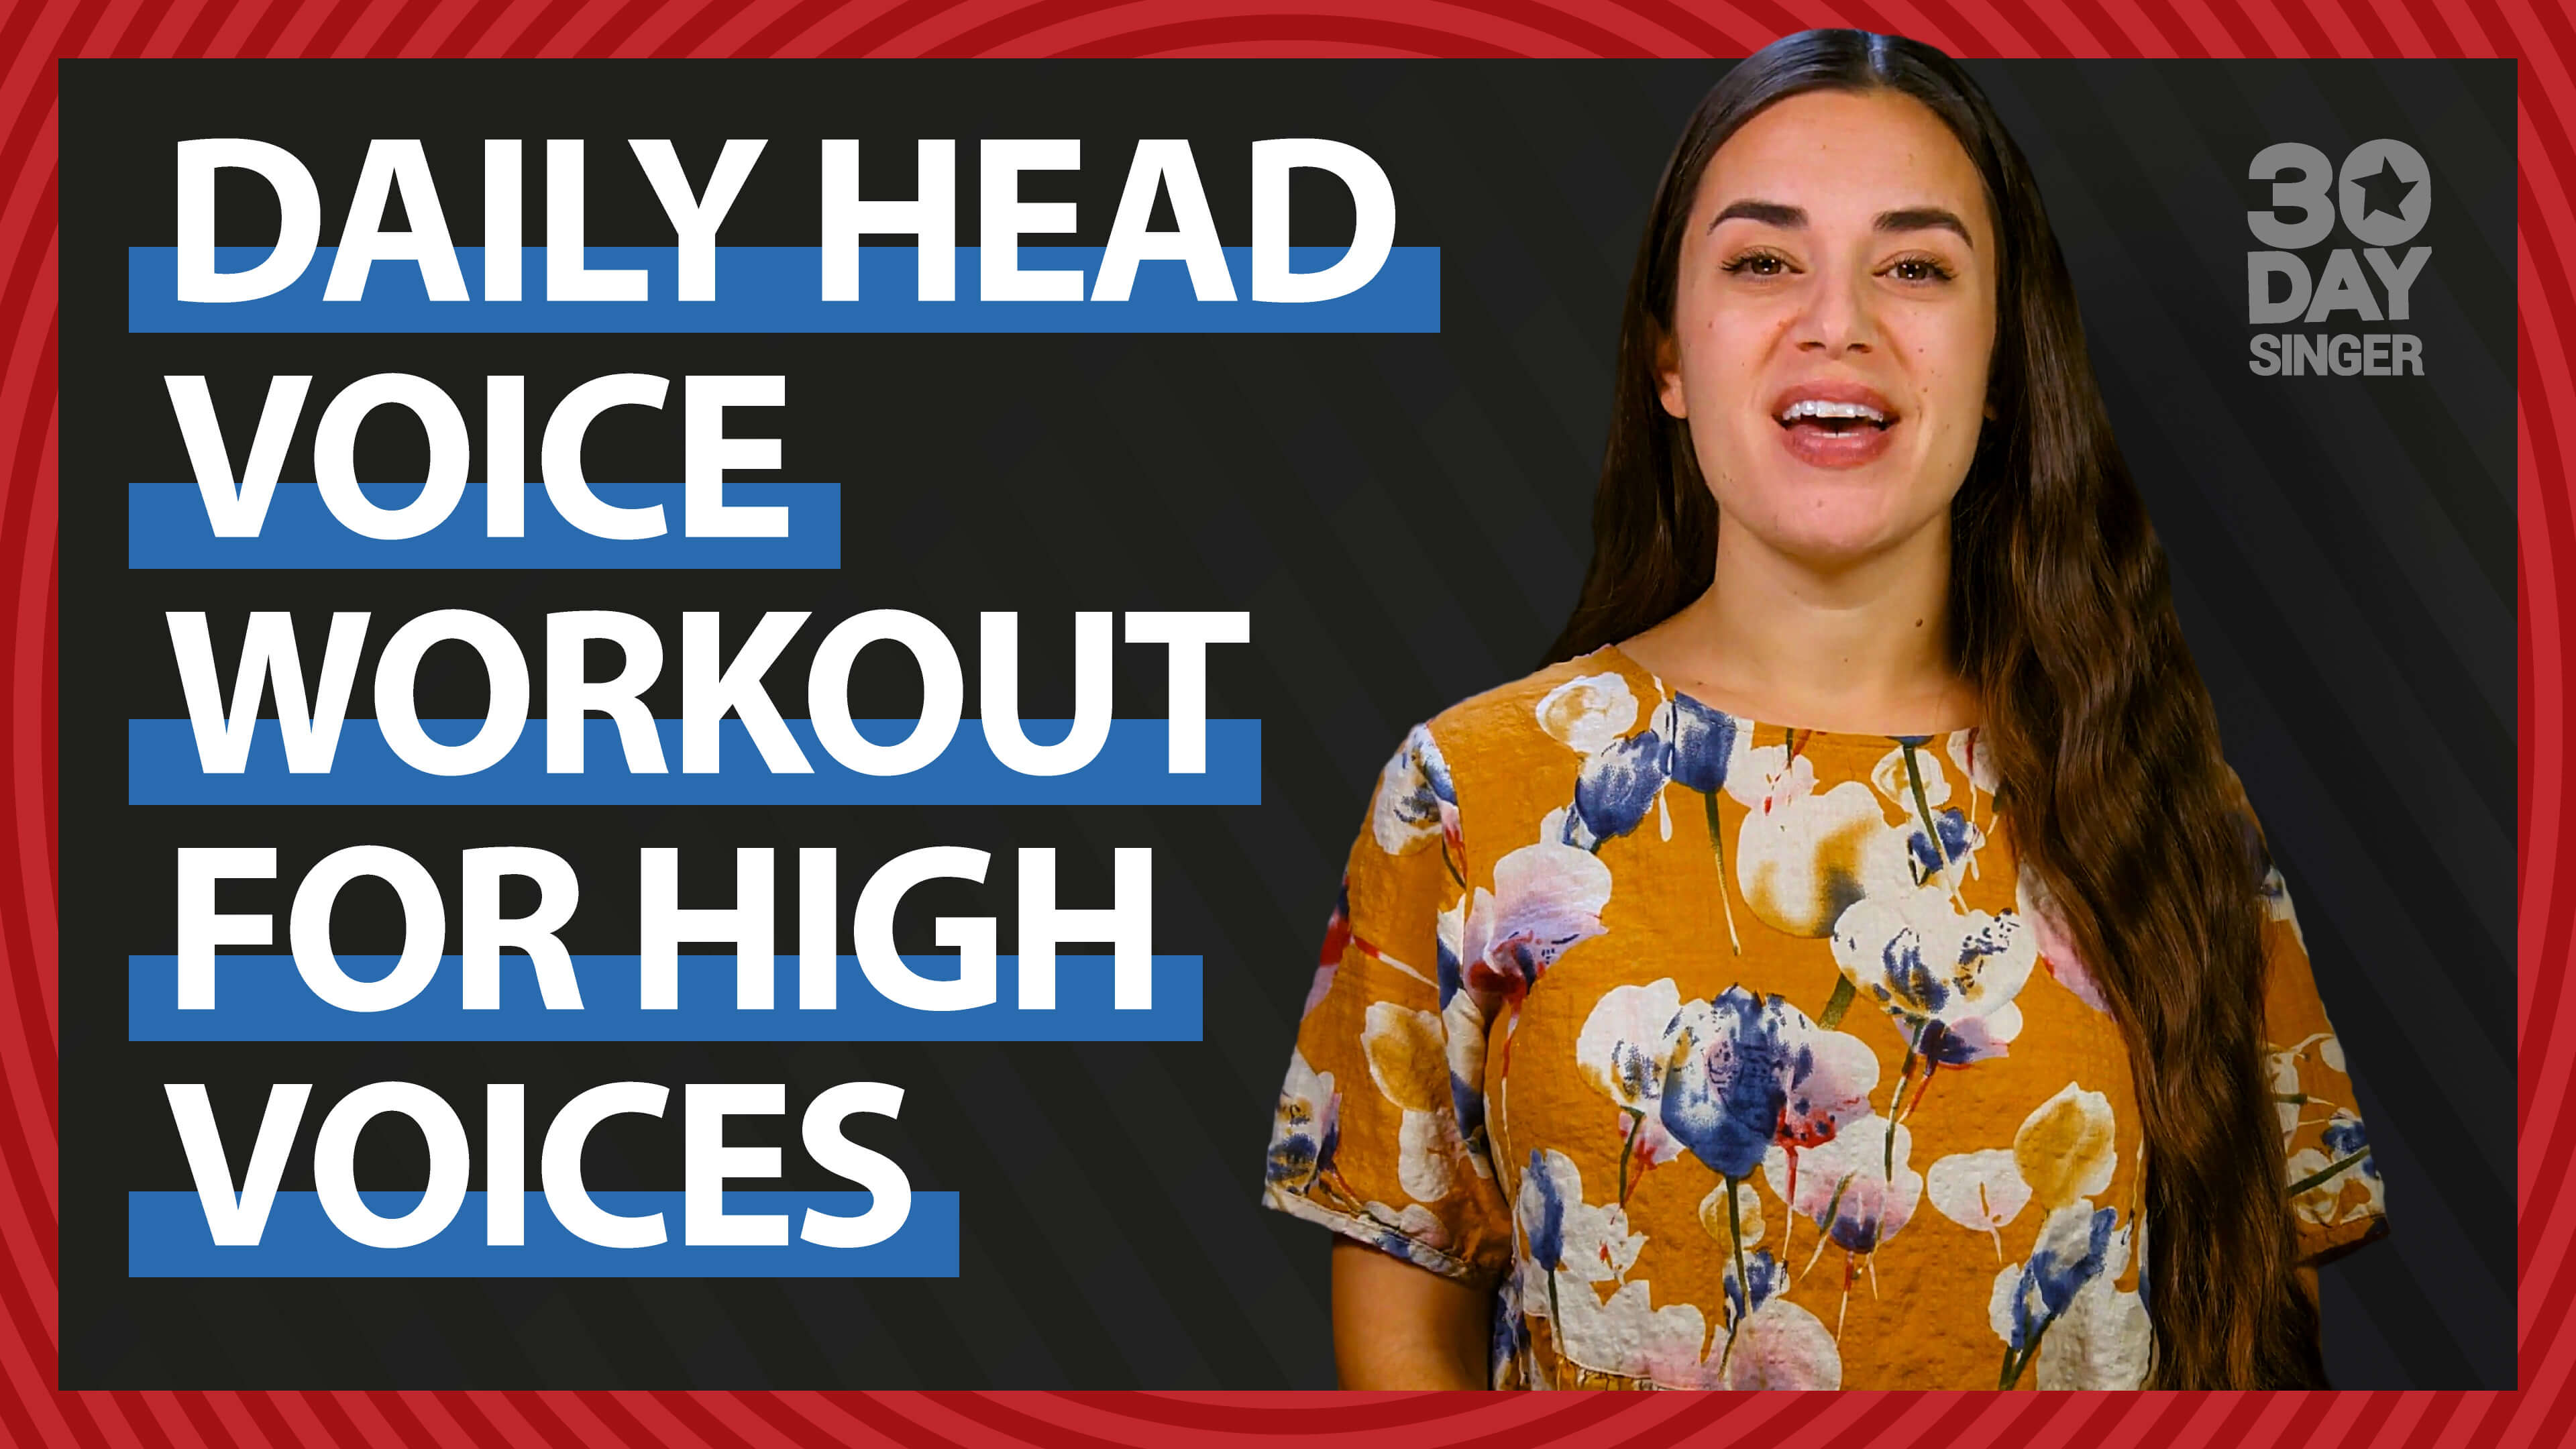 Daily Head Voice Workout For High Voices